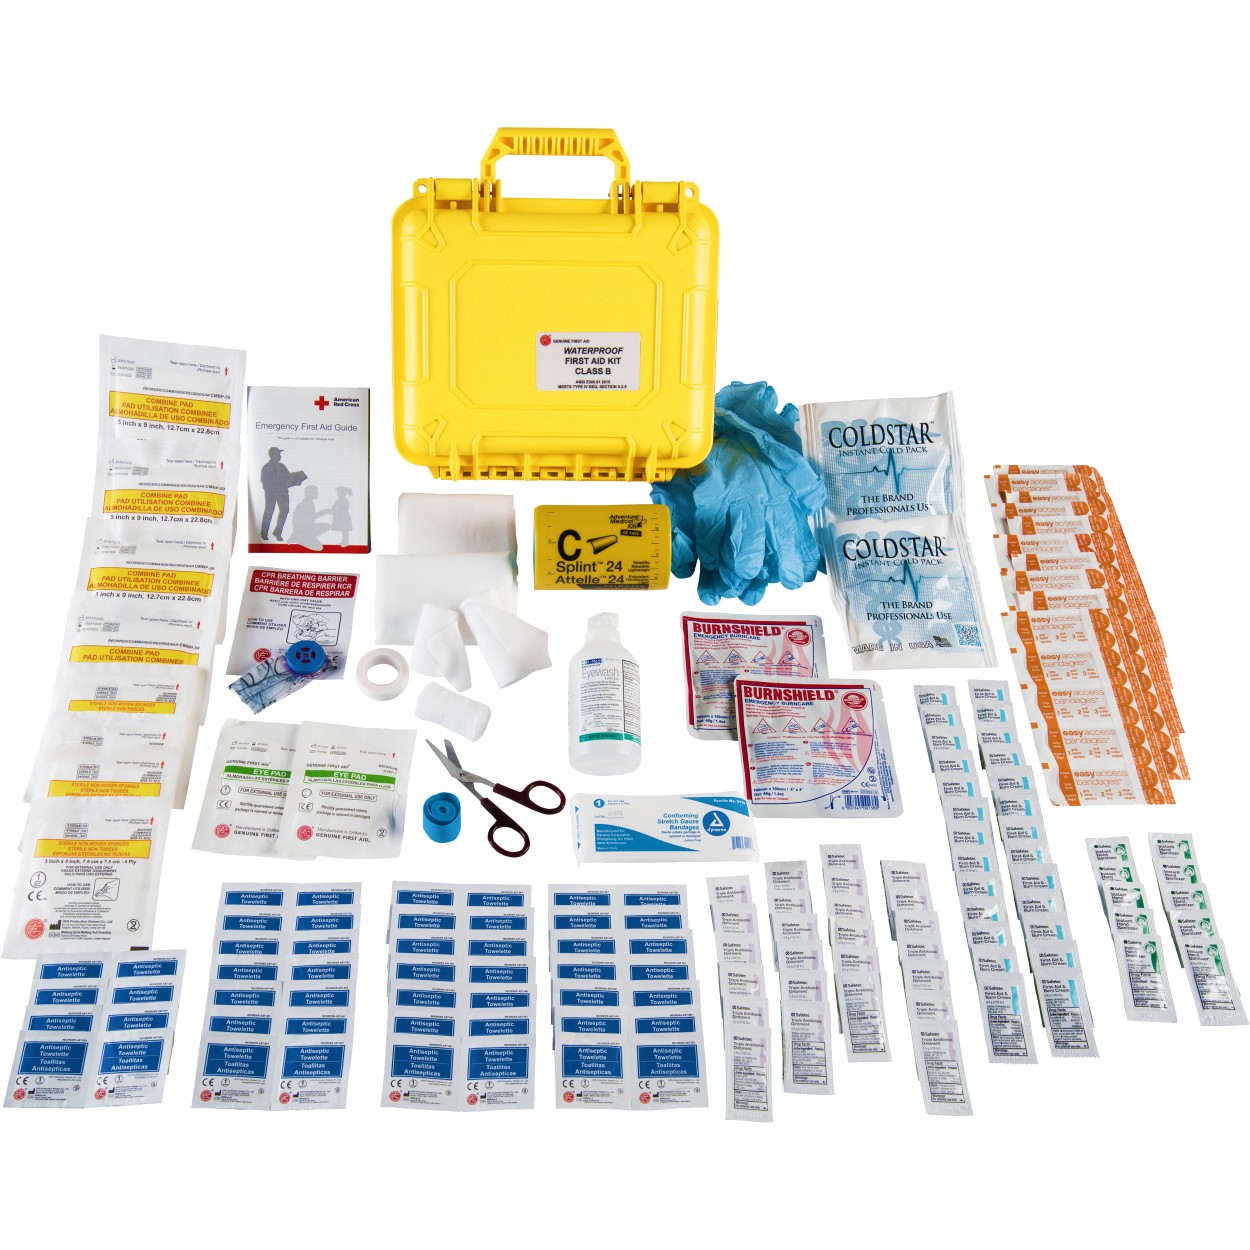 Genuine First Aid 50 Person ANSI Class B Type IV Waterproof First Aid Kit from Columbia Safety